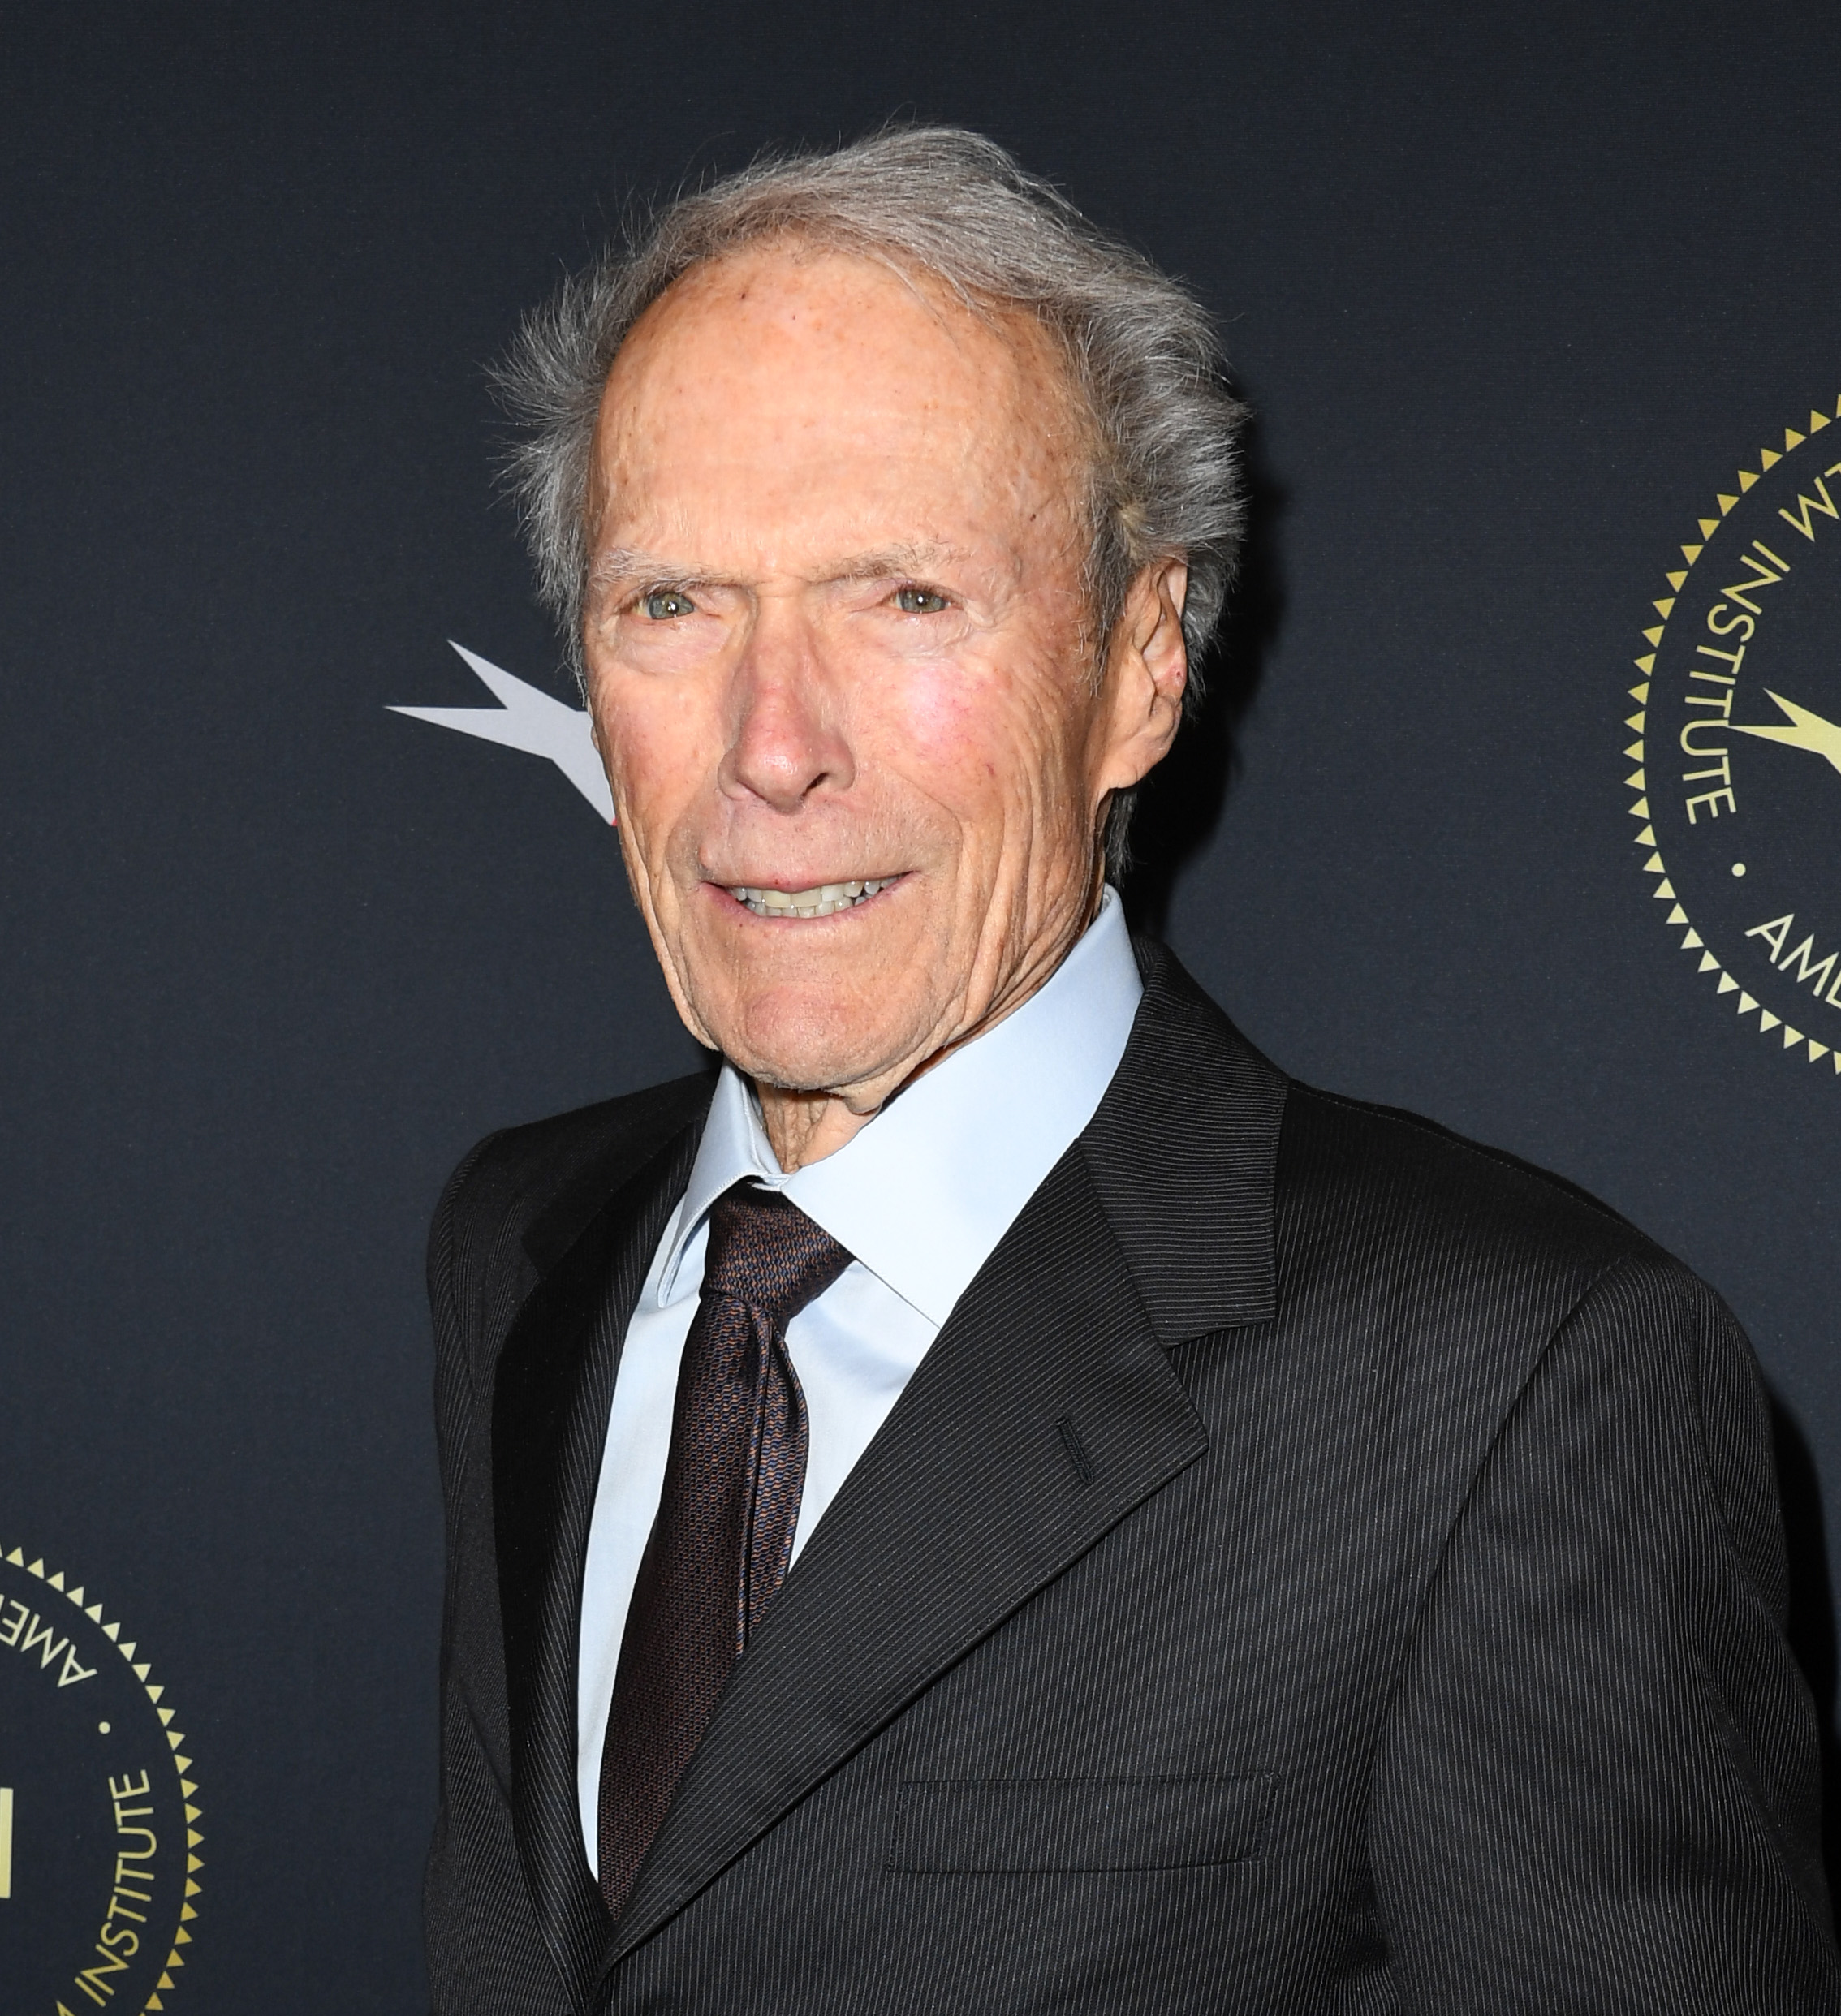 Clint Eastwood at the 20th Annual AFI Awards in Los Angeles, California on January 3, 2020 | Source: Getty Images